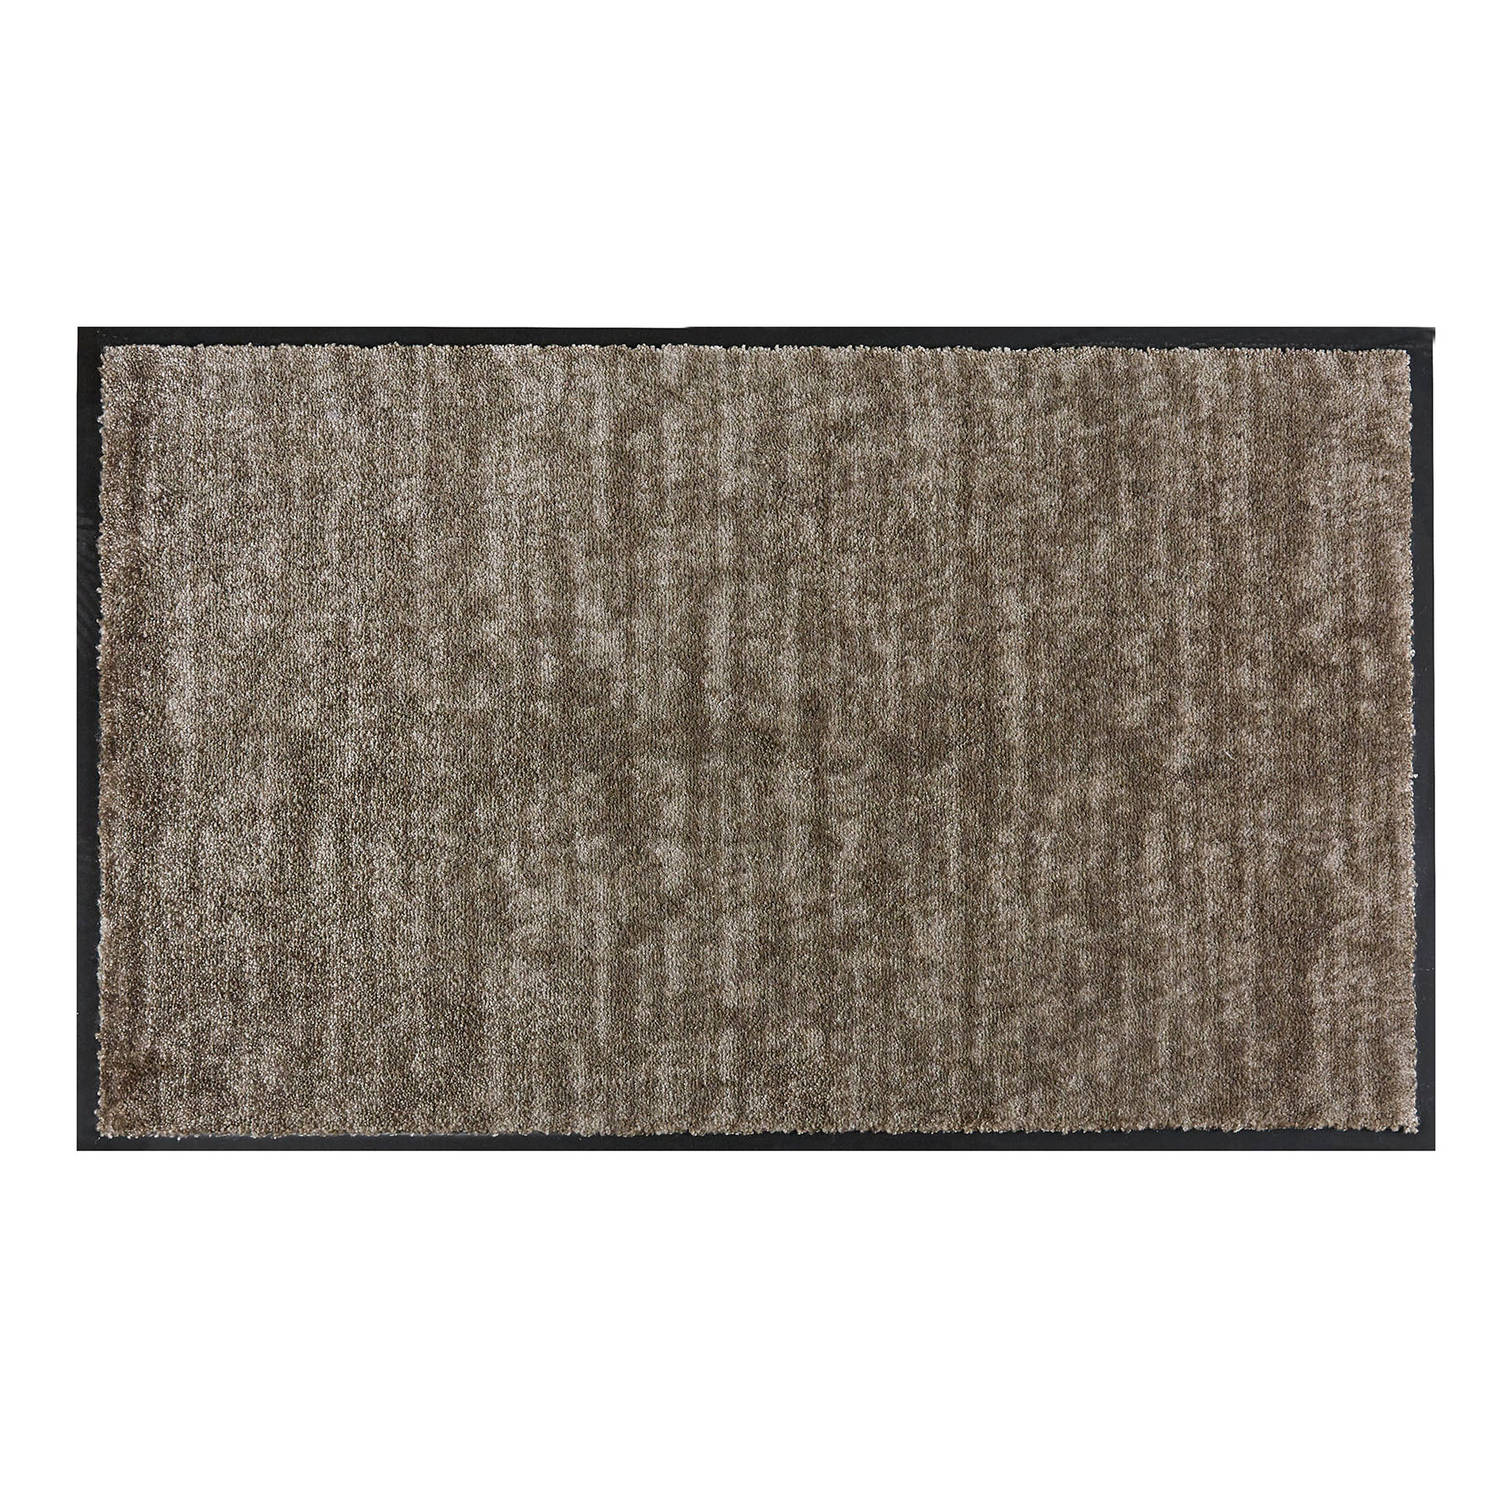 MD Entree - Schoonloopmat - Soft&Clean - Taupe - 55 x 90 cm